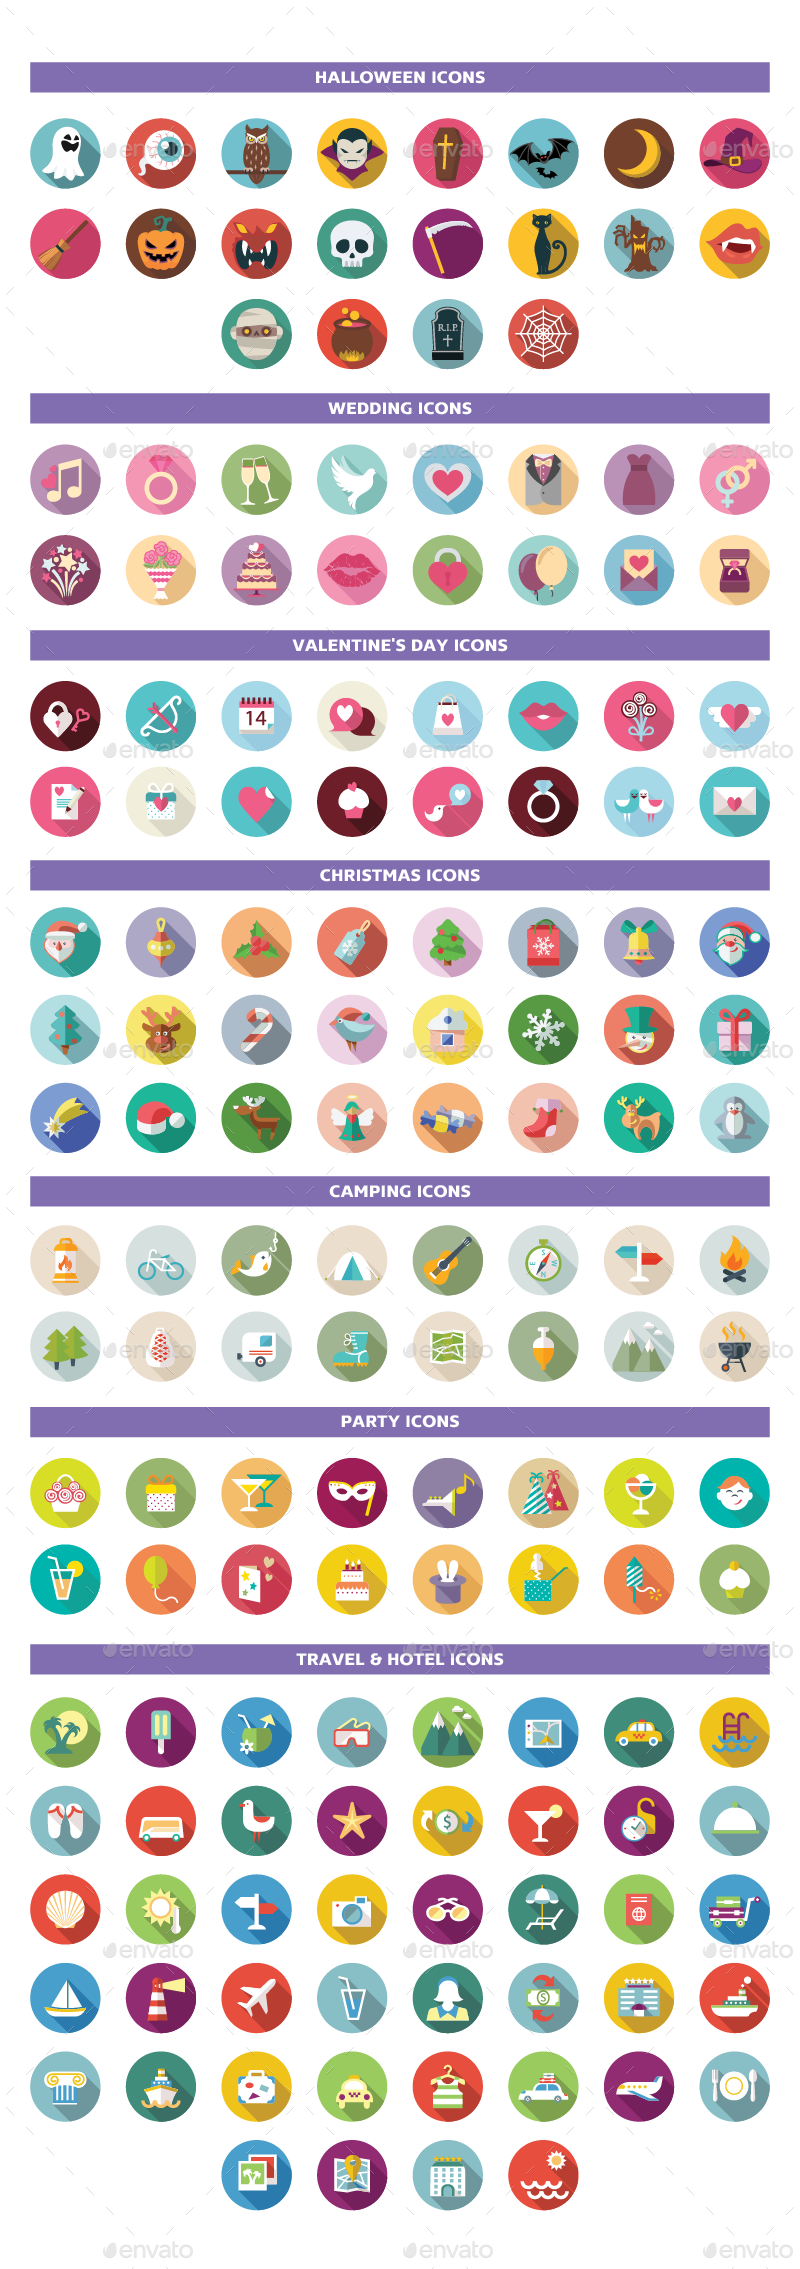 Universal Colorful Flat Icons, Icons | GraphicRiver